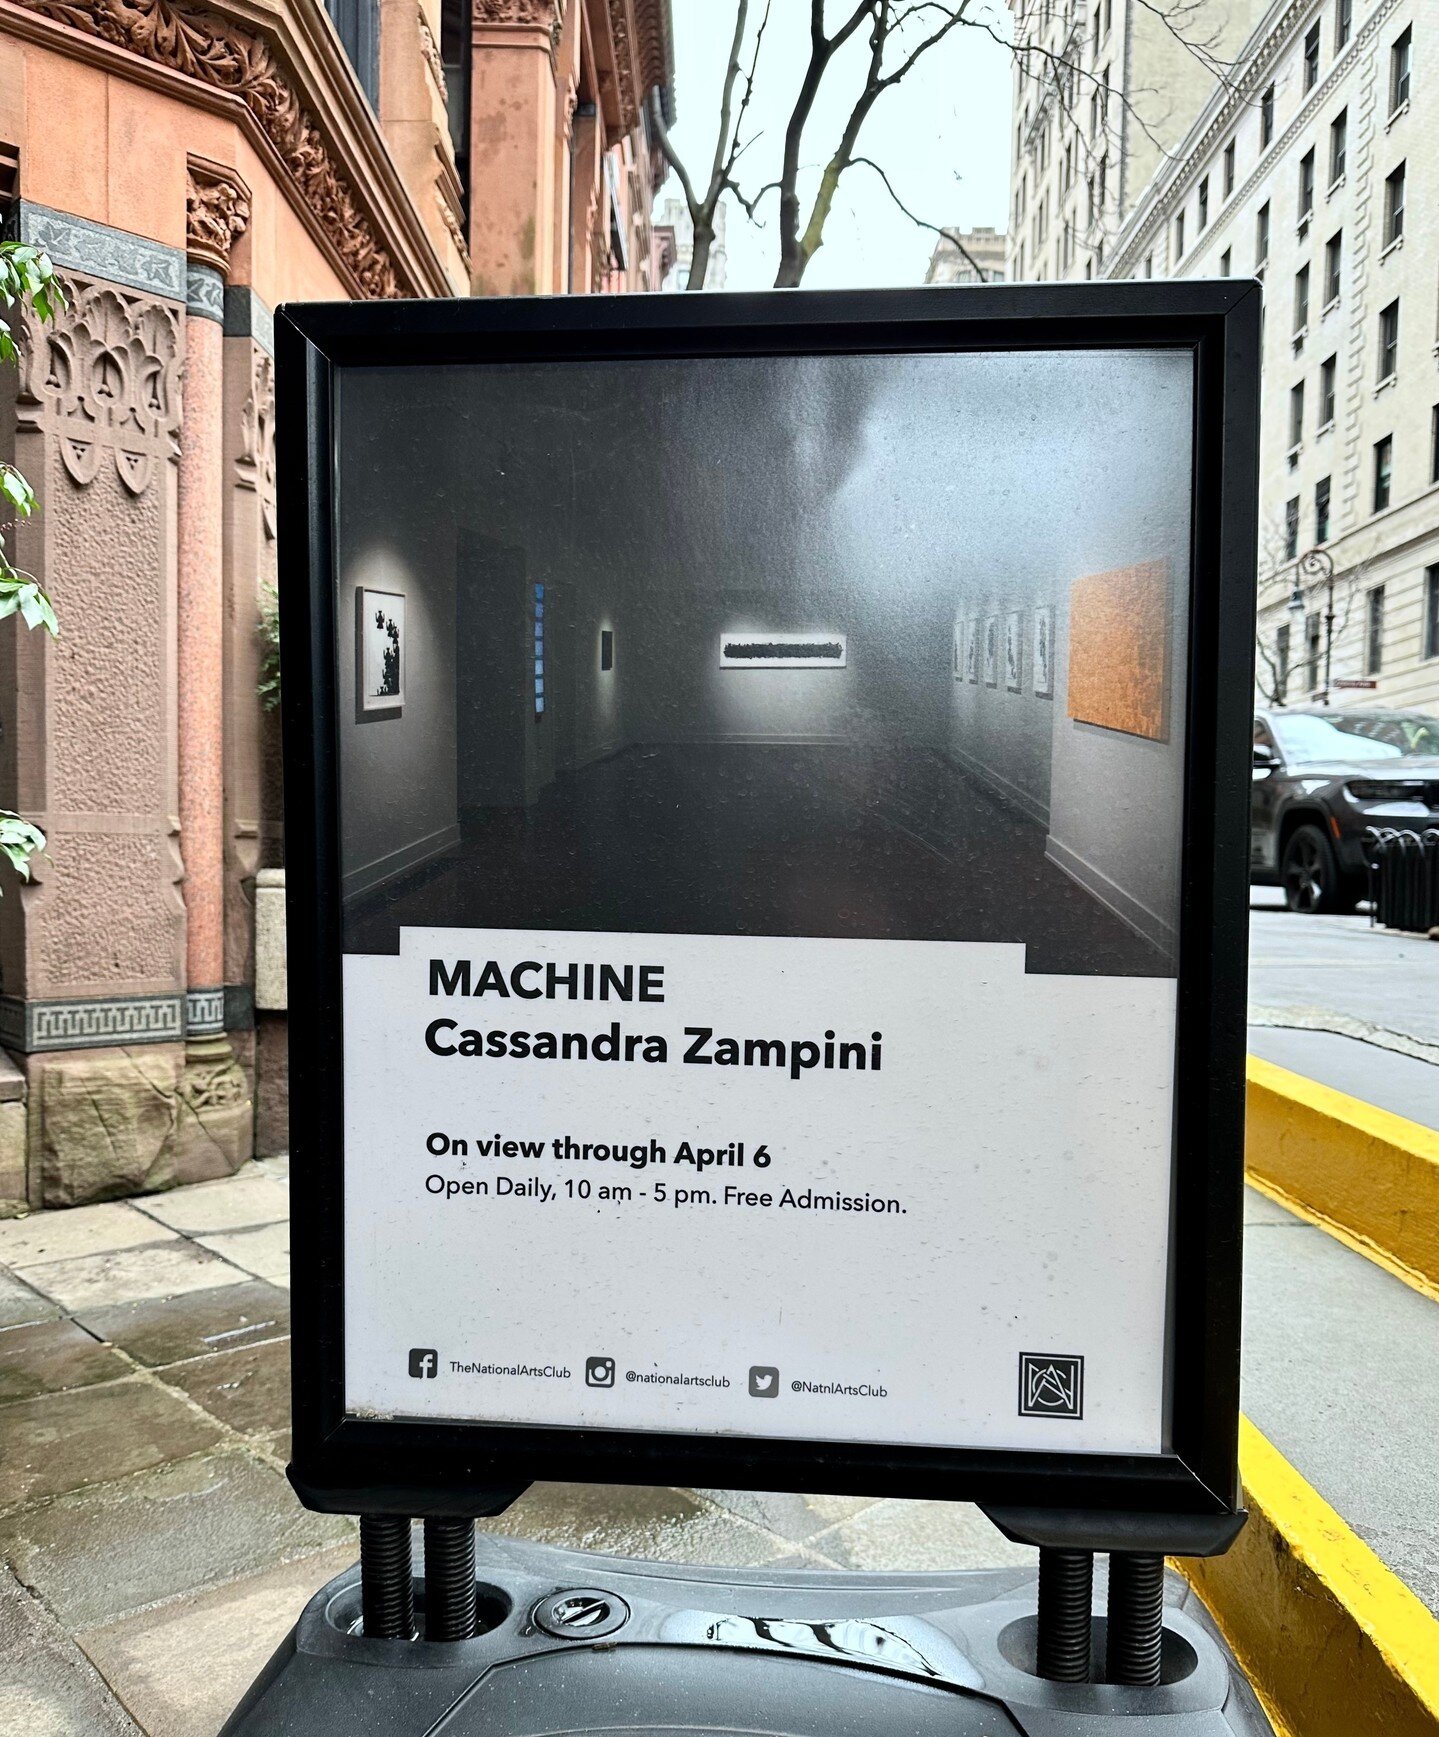 Tuesday 3/7 6pm: Please join me for an Artist Tour and conversation at my solo exhibition &quot;Machine&quot; @nationalartsclub ⁠
⁠
On view until April 6, 2023⁠
⁠
More information via linktree in bio⬆️⁠
⁠
⁠
⁠
⁠
⁠
#cassandrazampini #artisttour #solosh